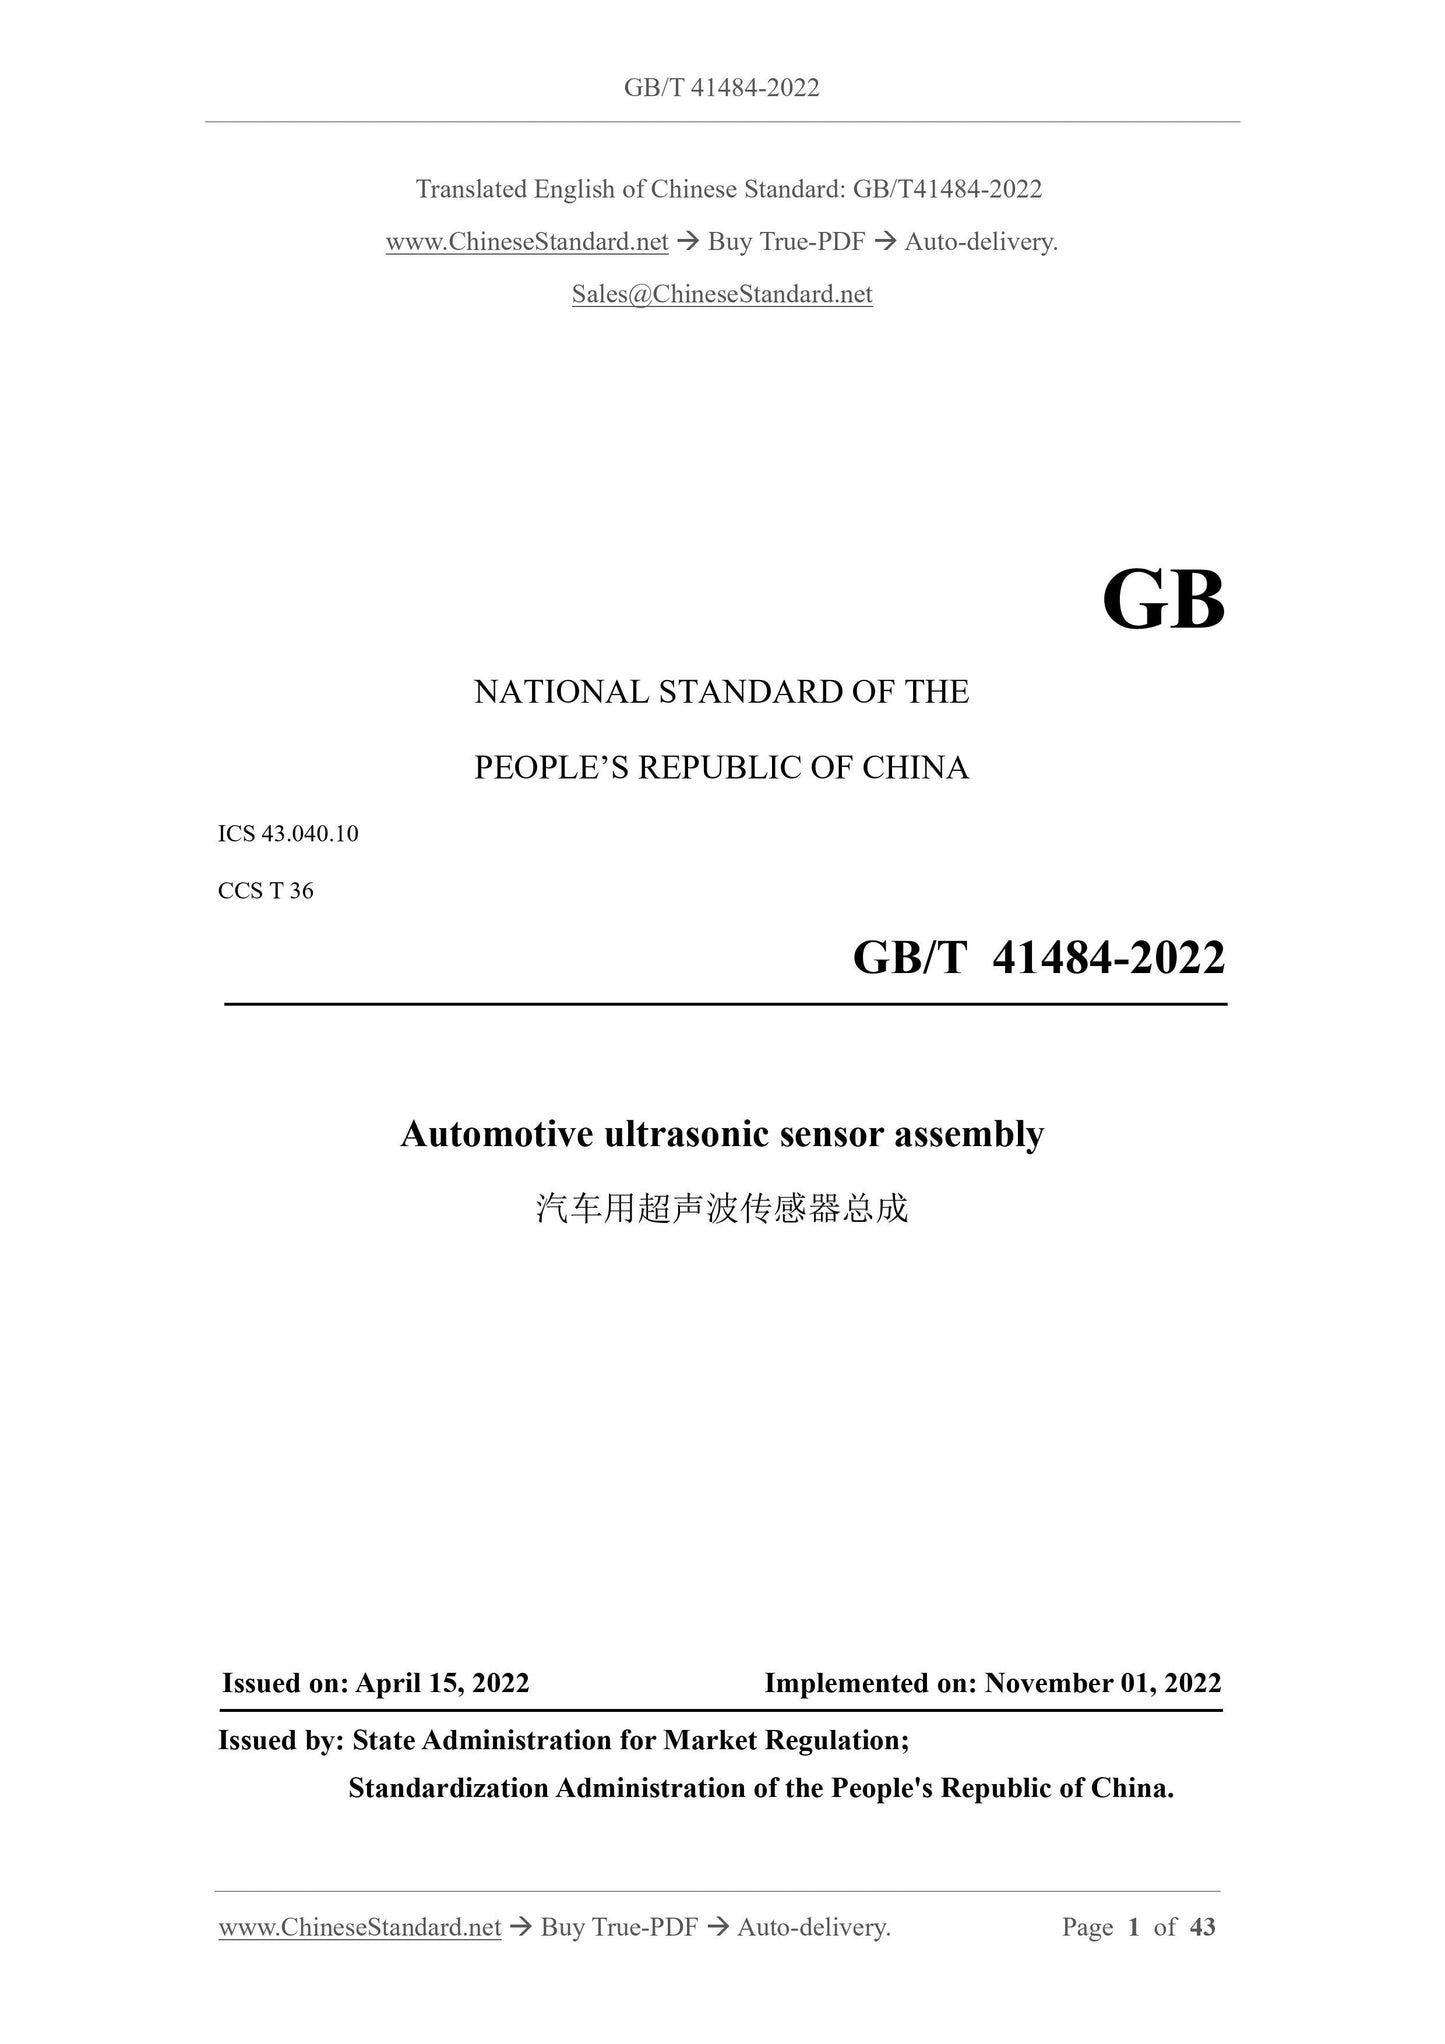 GB/T 41484-2022 Page 1